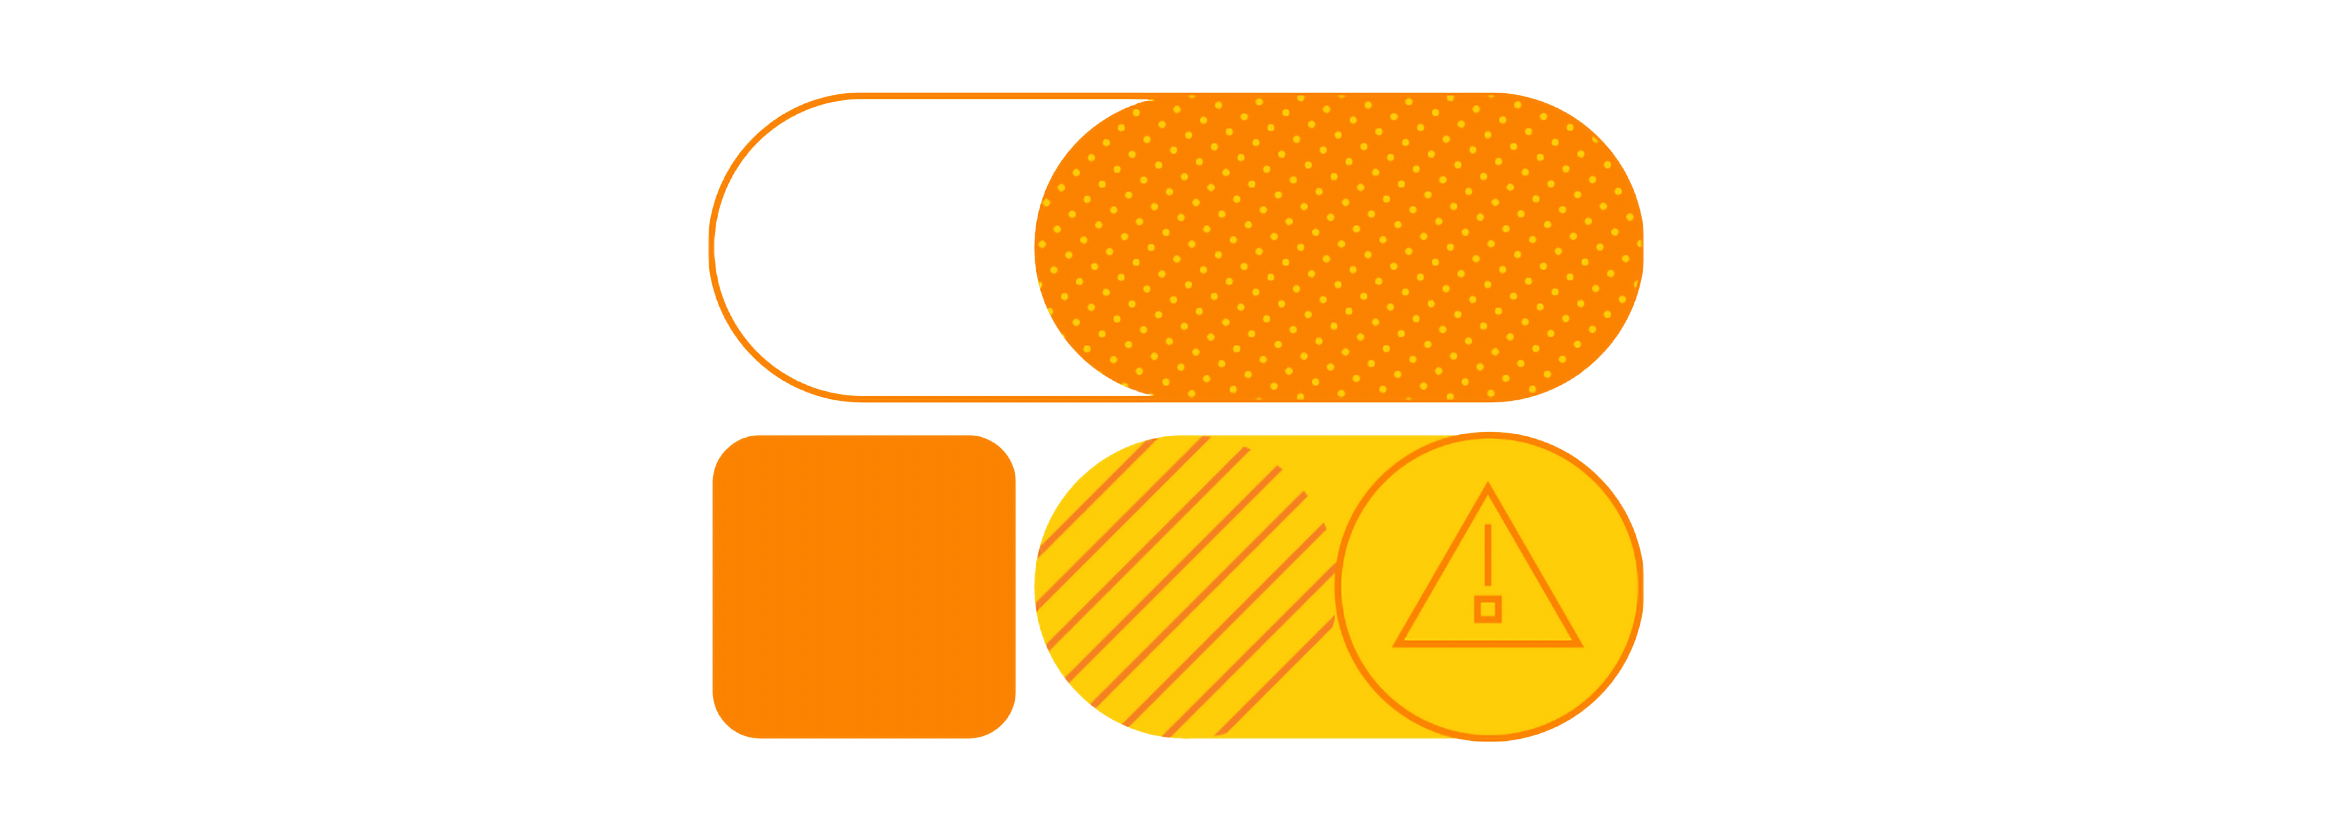 Yellow and orange patterns and symbols against a white background.